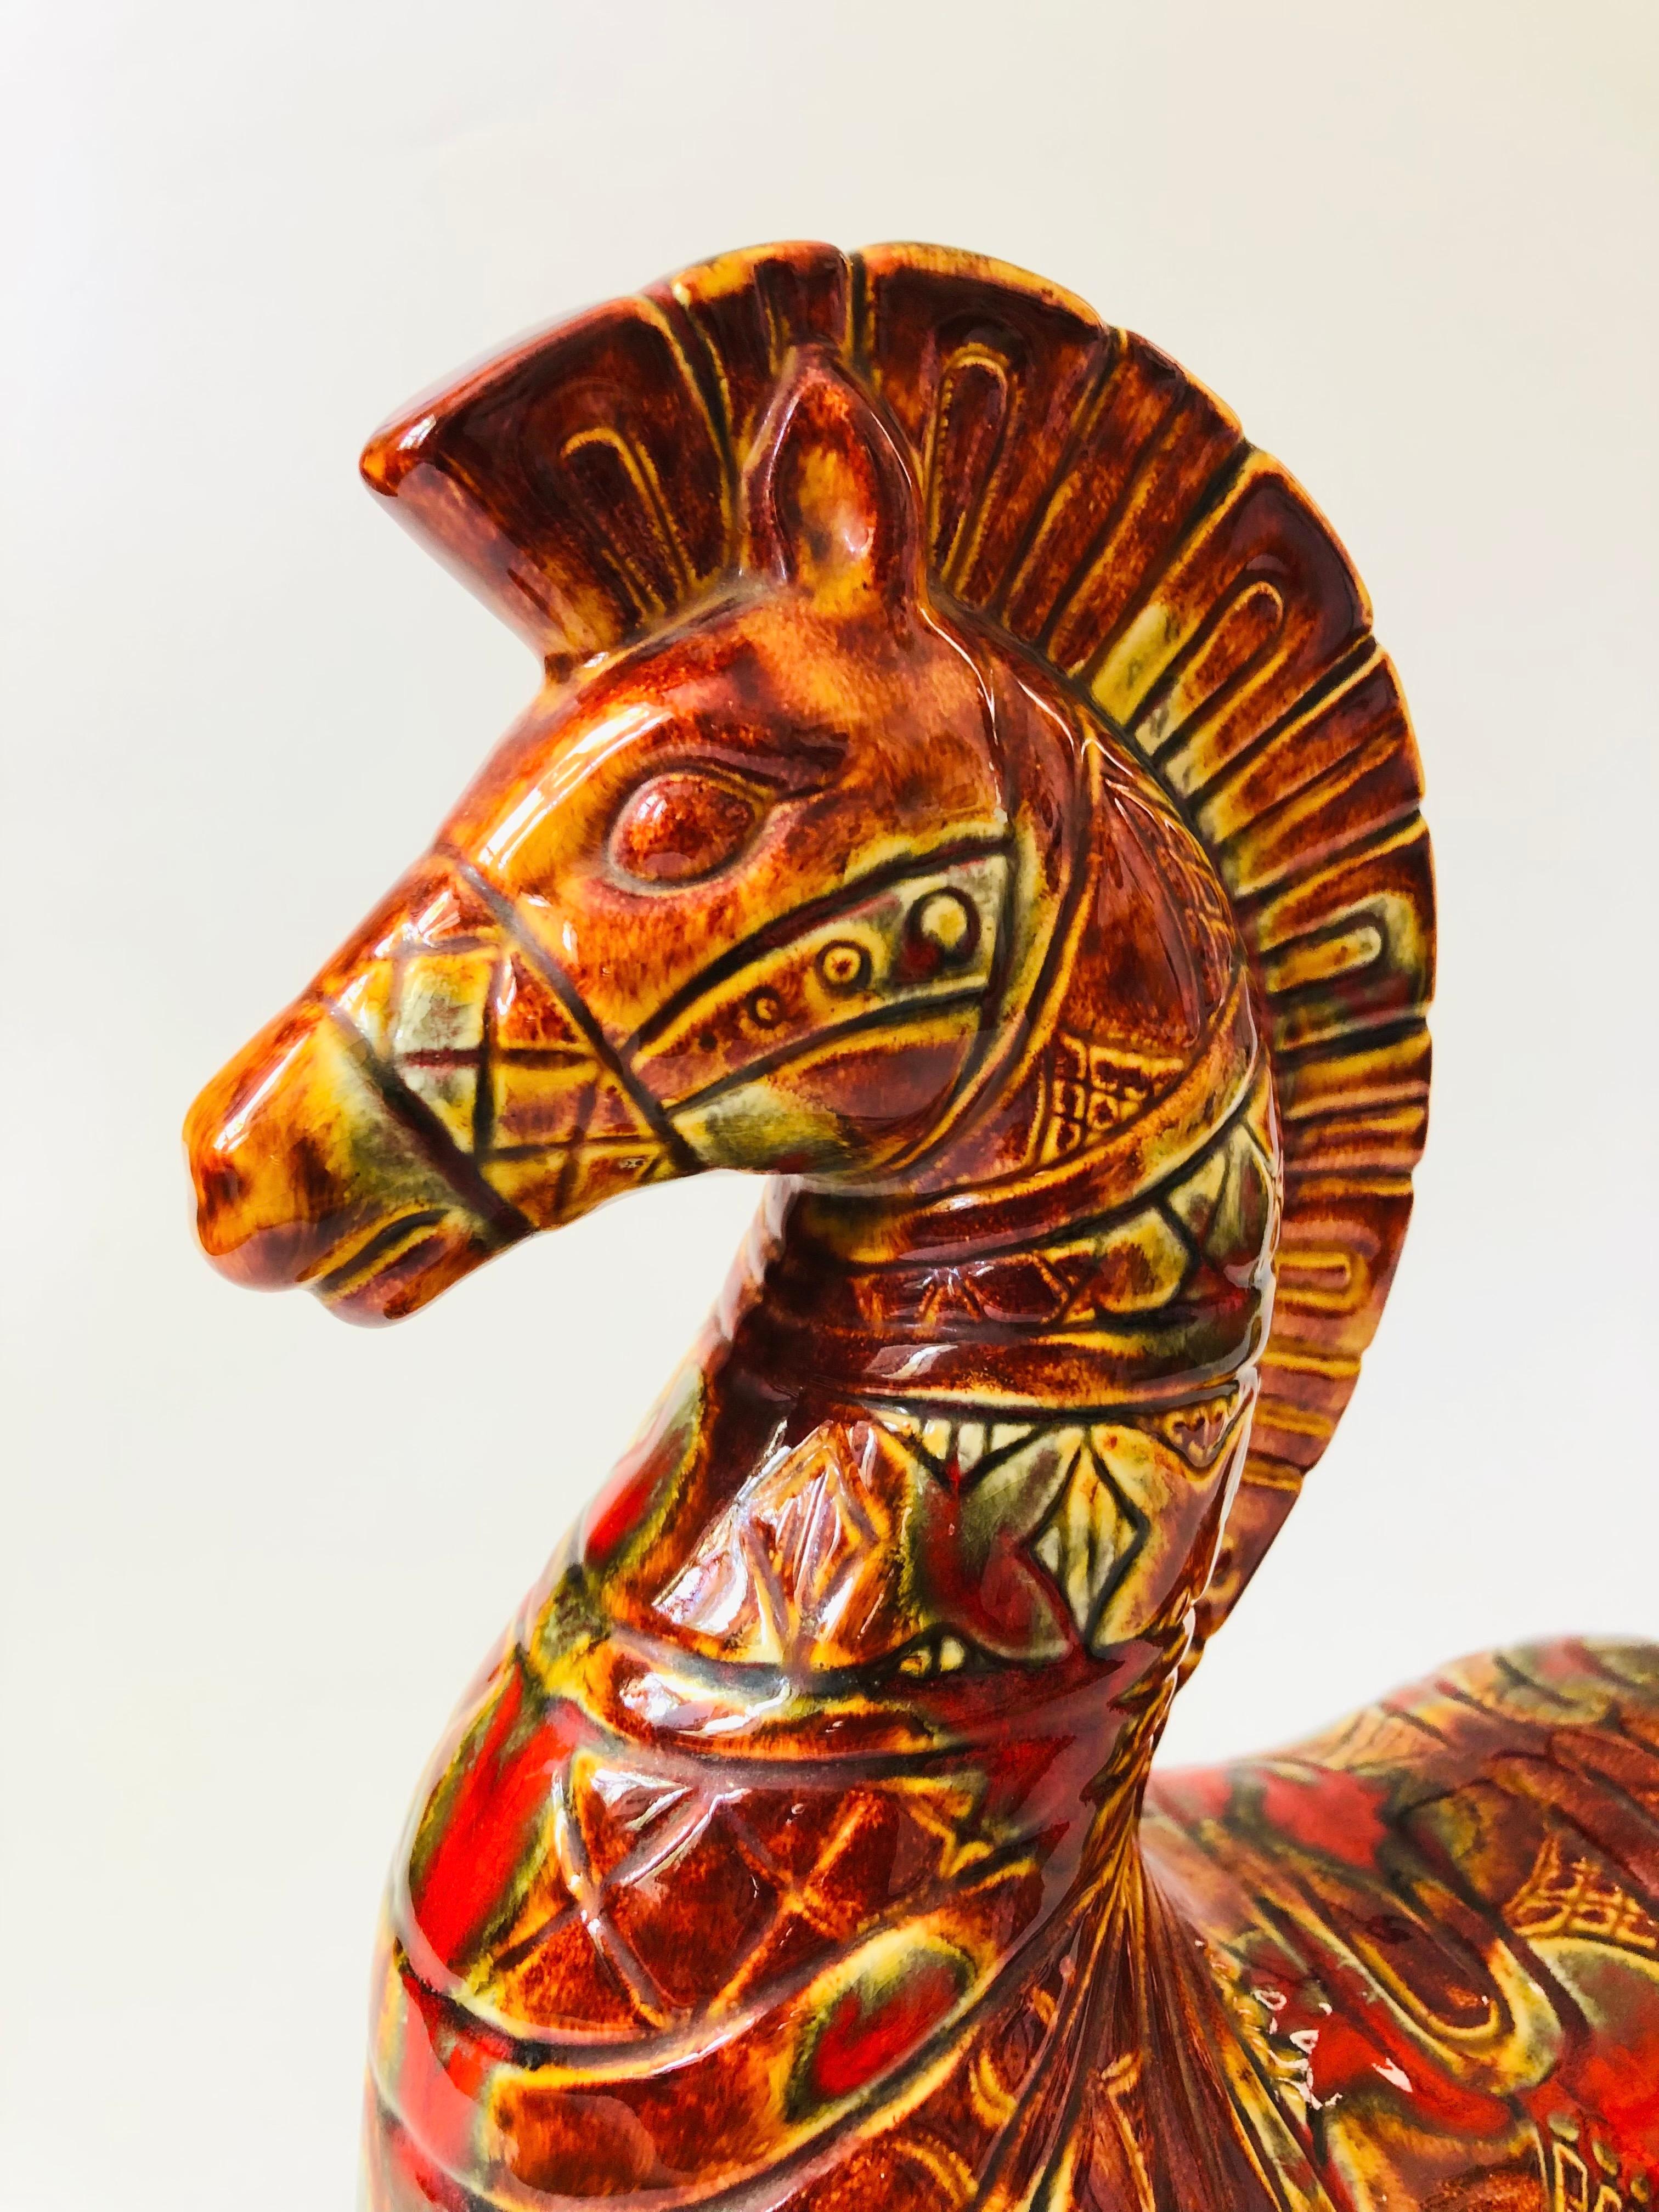 A large mid century ceramic art pottery ram in the style of Bitossi. Red-orange and yellow glazes with an intricate carved pattern to the surface in a mid century stylized form. A great statement piece.

